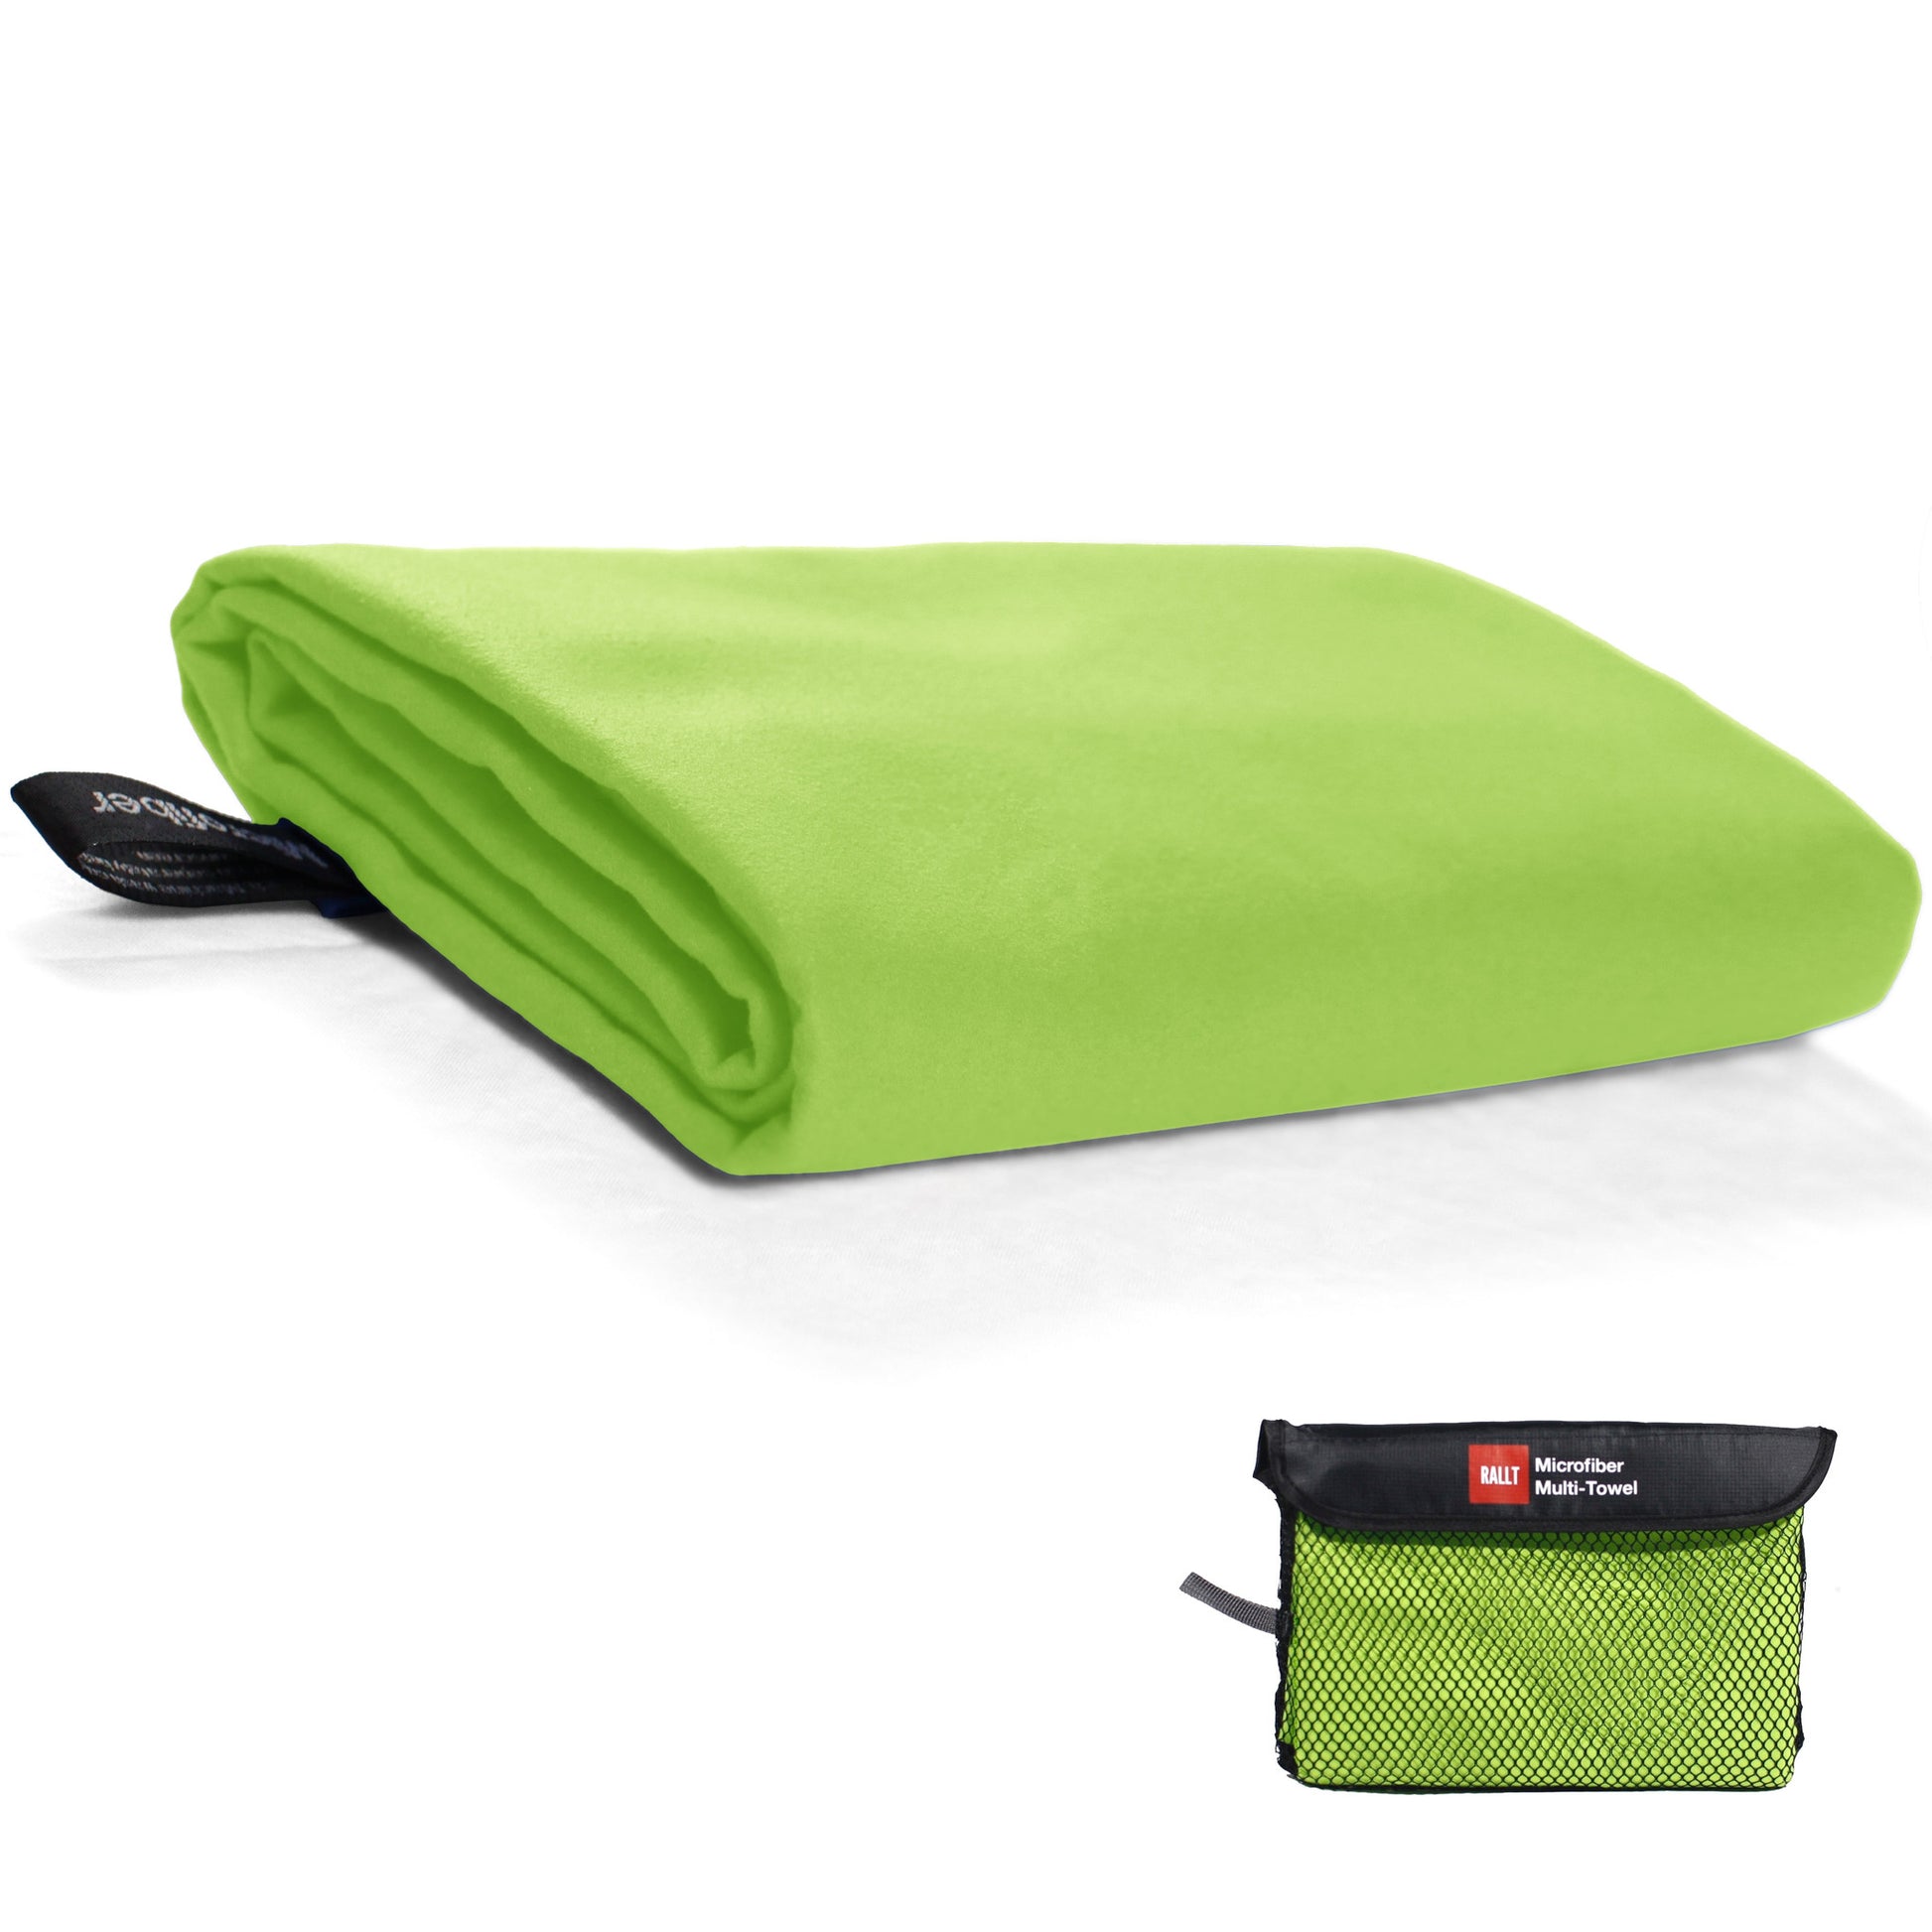 RALLT Camping Travel Towel - Compact Quick Dry Microfiber - Great for Sports, Swimming, Backpacking, Hiking, Gym, or Camp